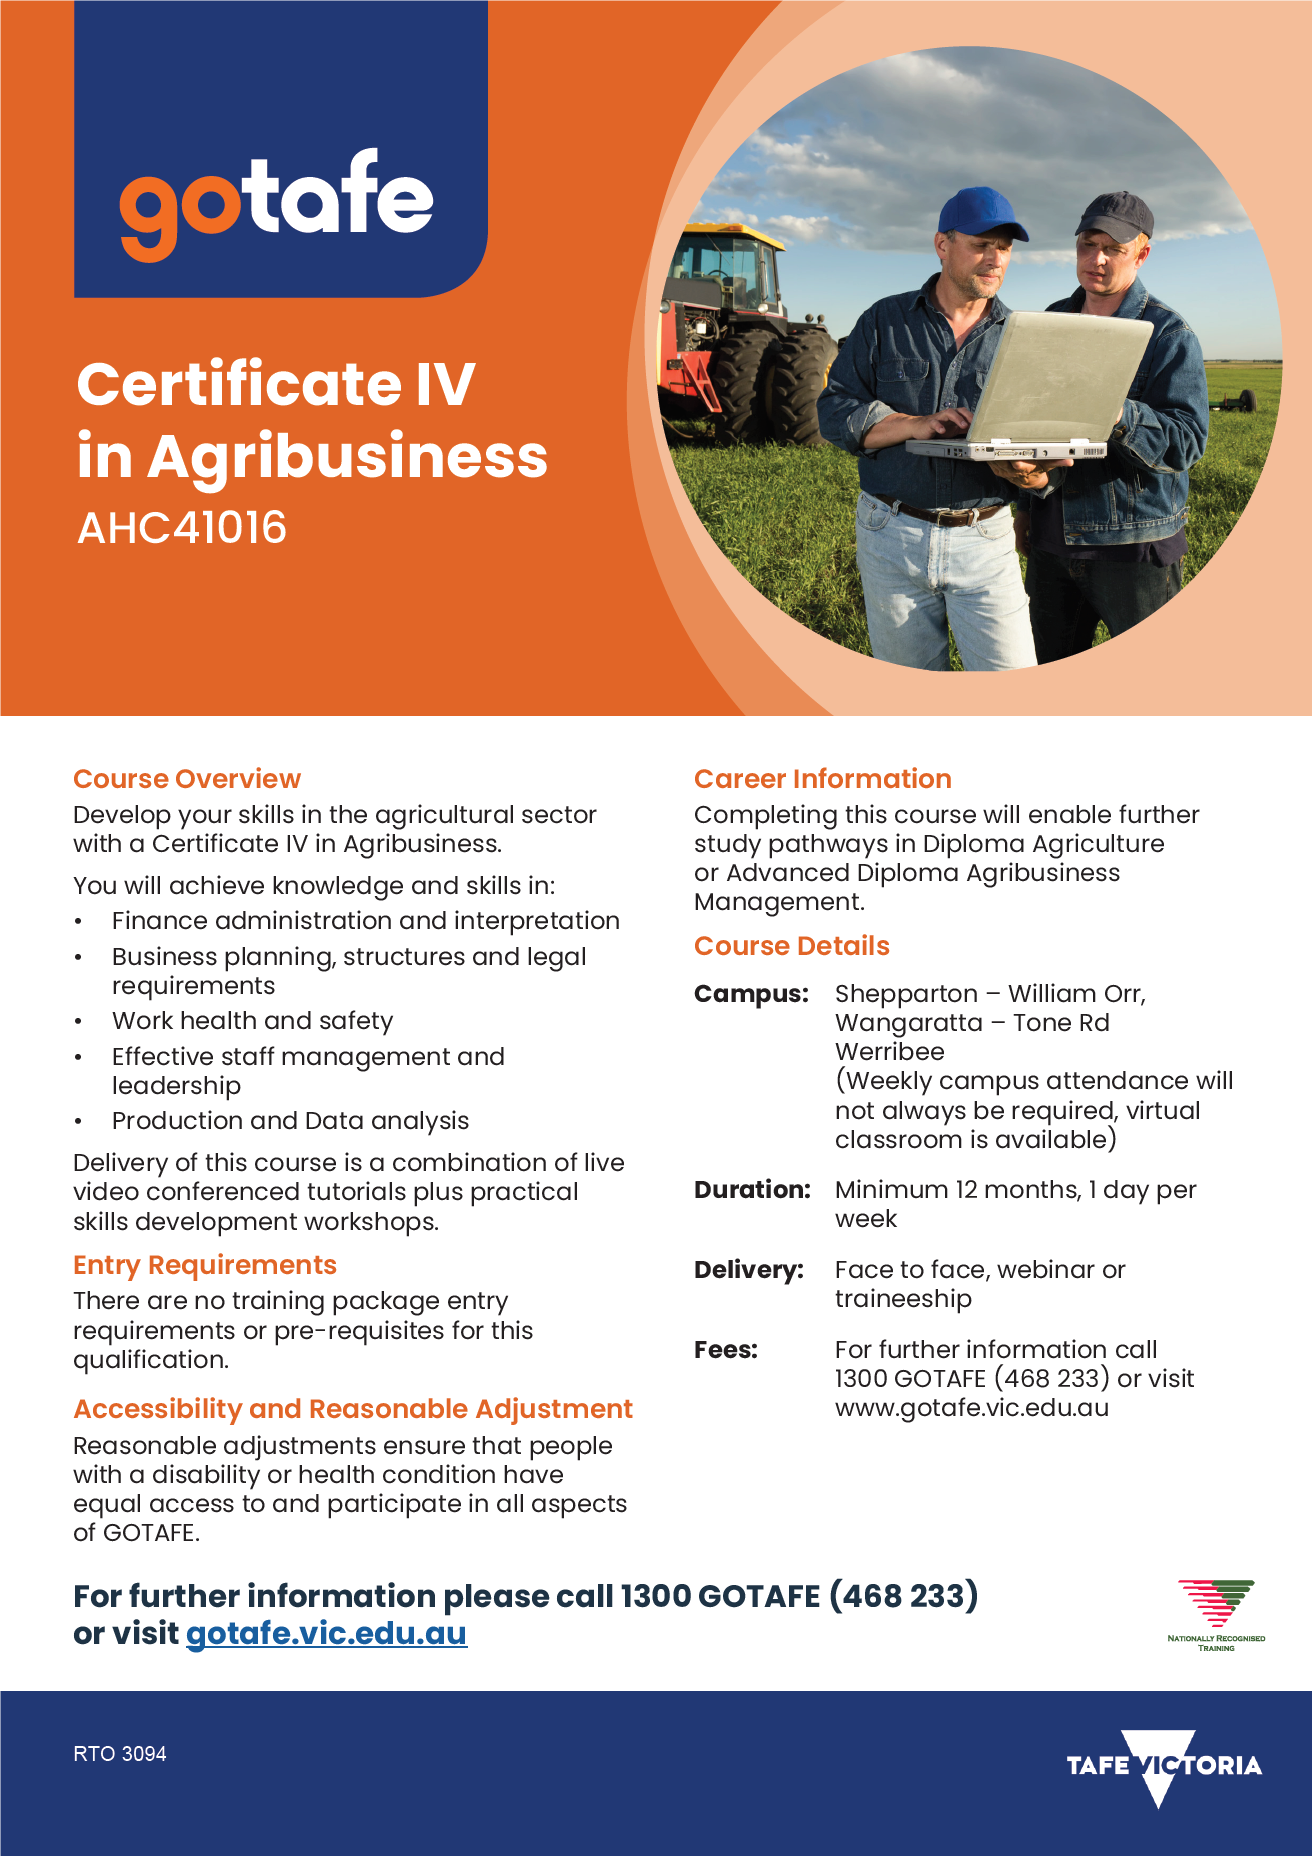 GOTAFE- Certificate IV in Agribusiness